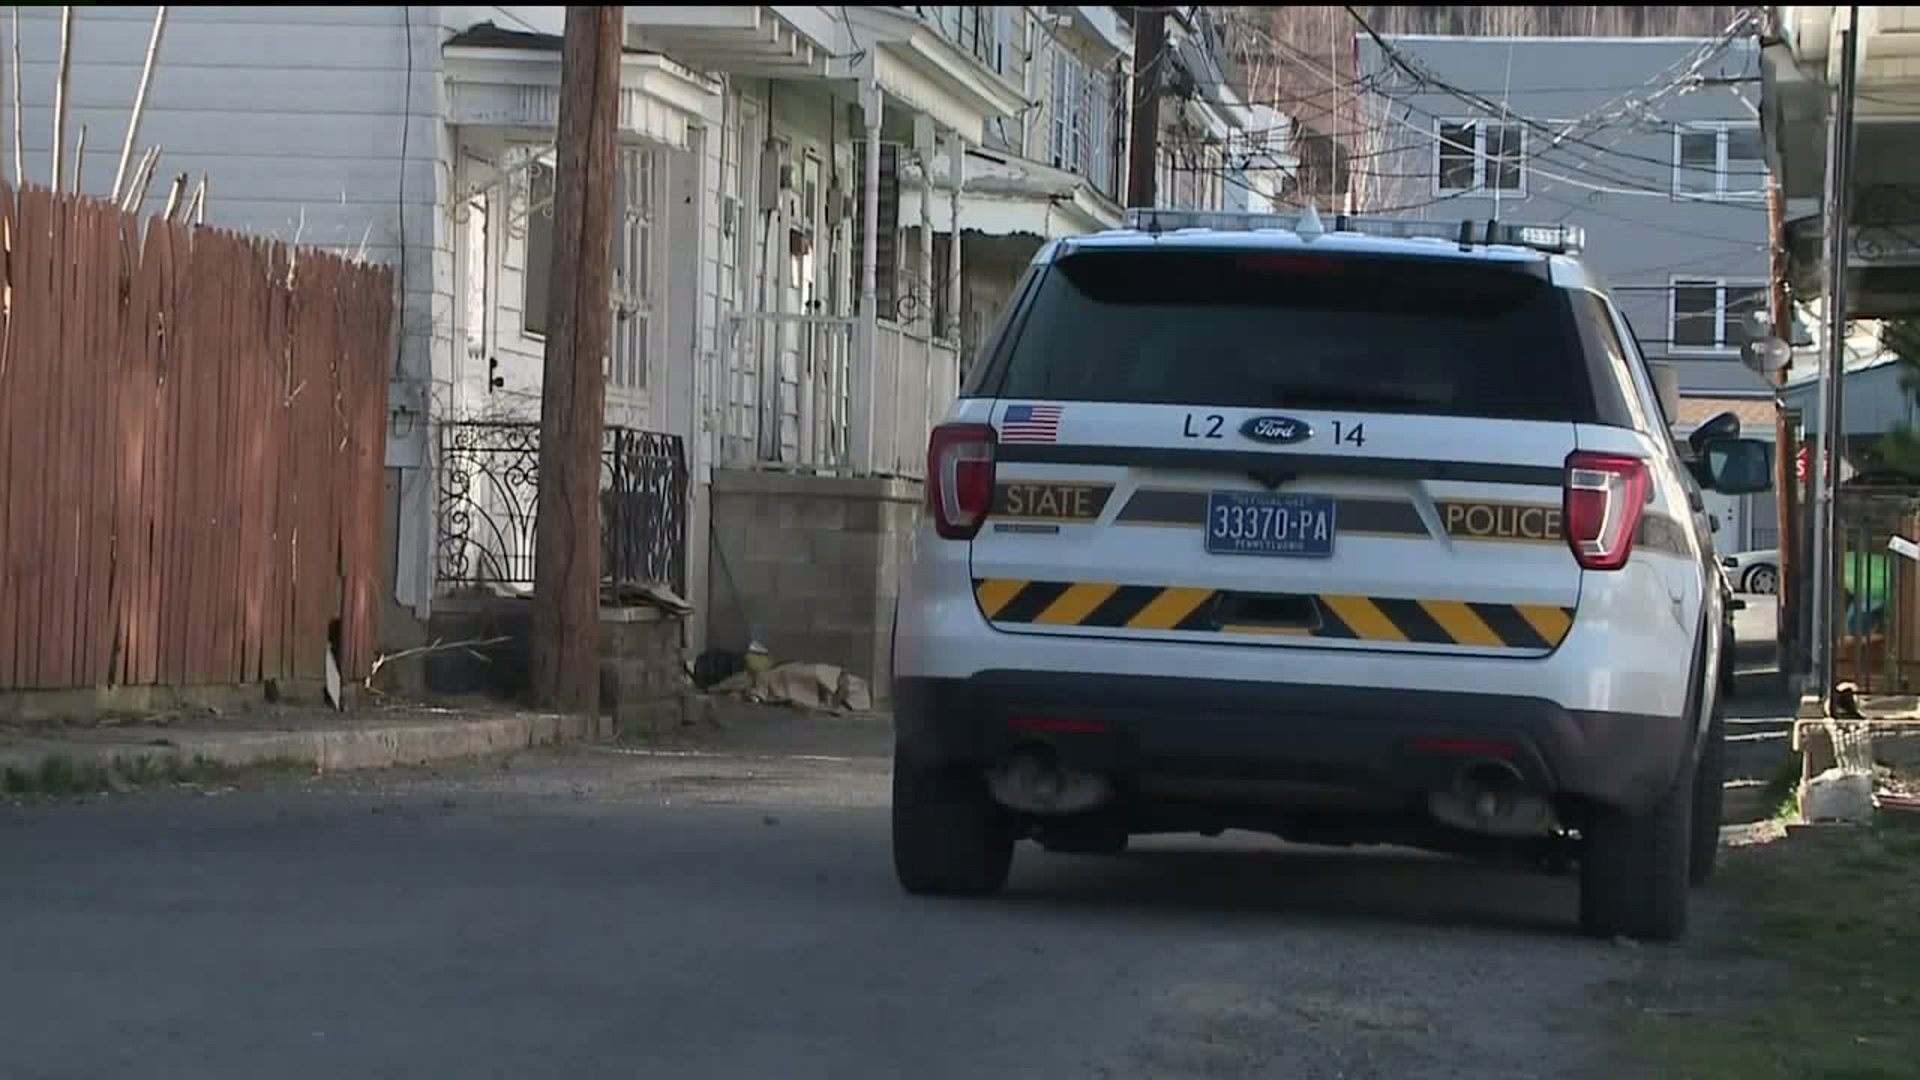 Police Investigating Death of an Infant in Schuylkill County